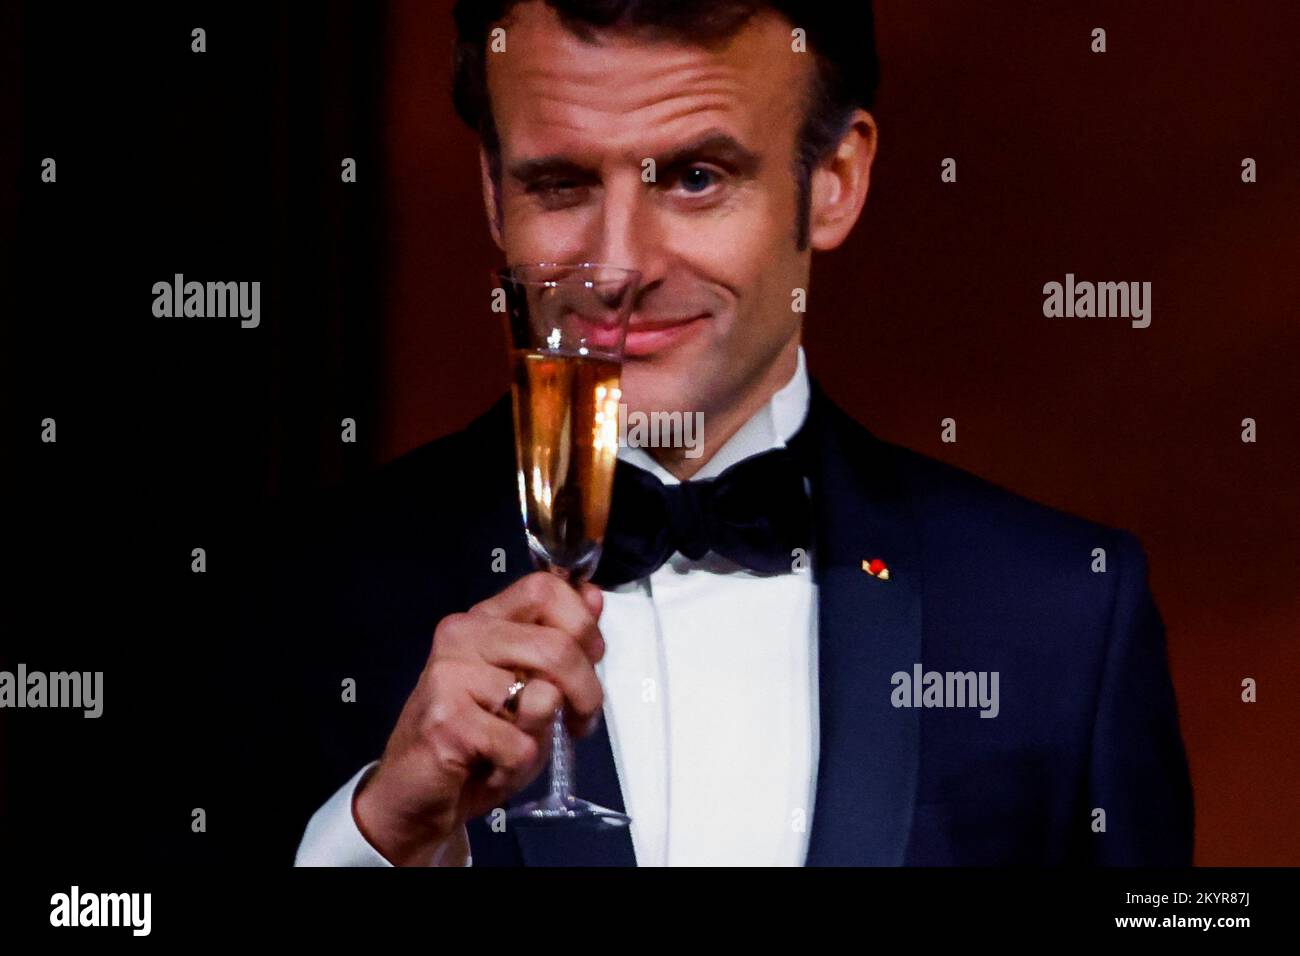 France's President Emmanuel Macron makes a toast, as the Bidens host the Macrons for a State Dinner at the White House, in Washington, U.S., December 1, 2022.  REUTERS/Evelyn Hockstein     TPX IMAGES OF THE DAY Stock Photo